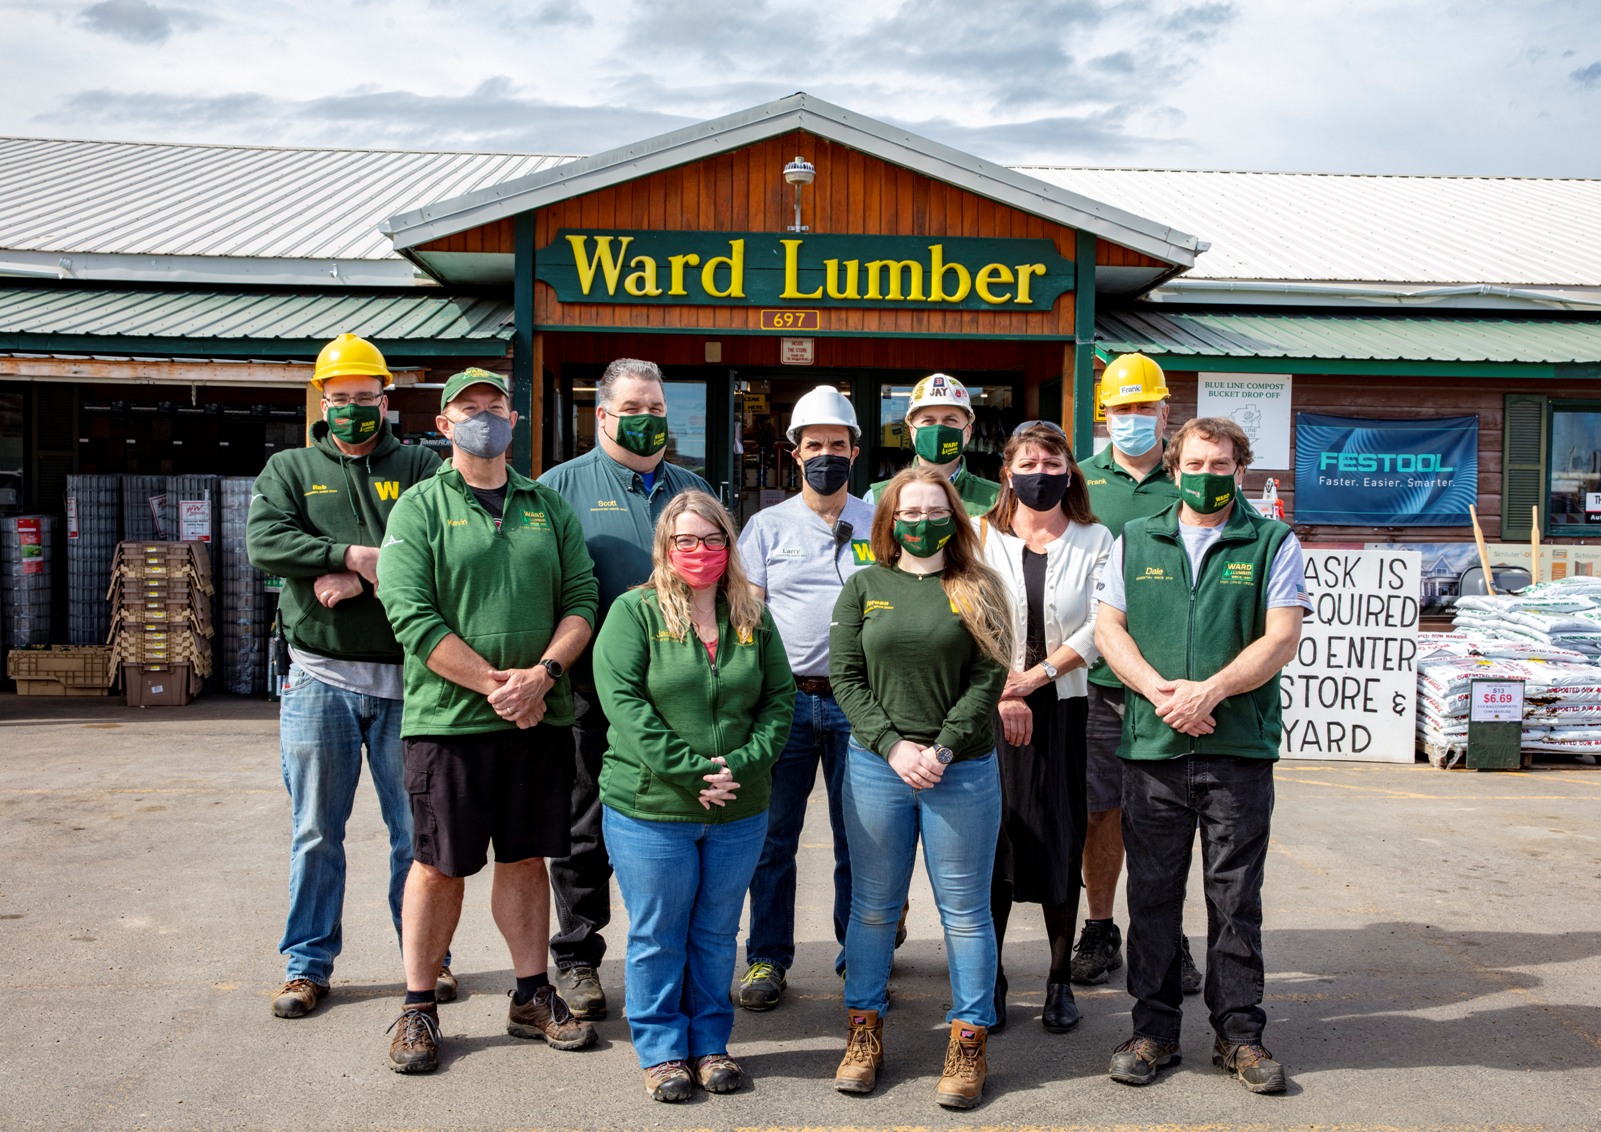 Workers from Ward Lumber in front of their Jay, NY location